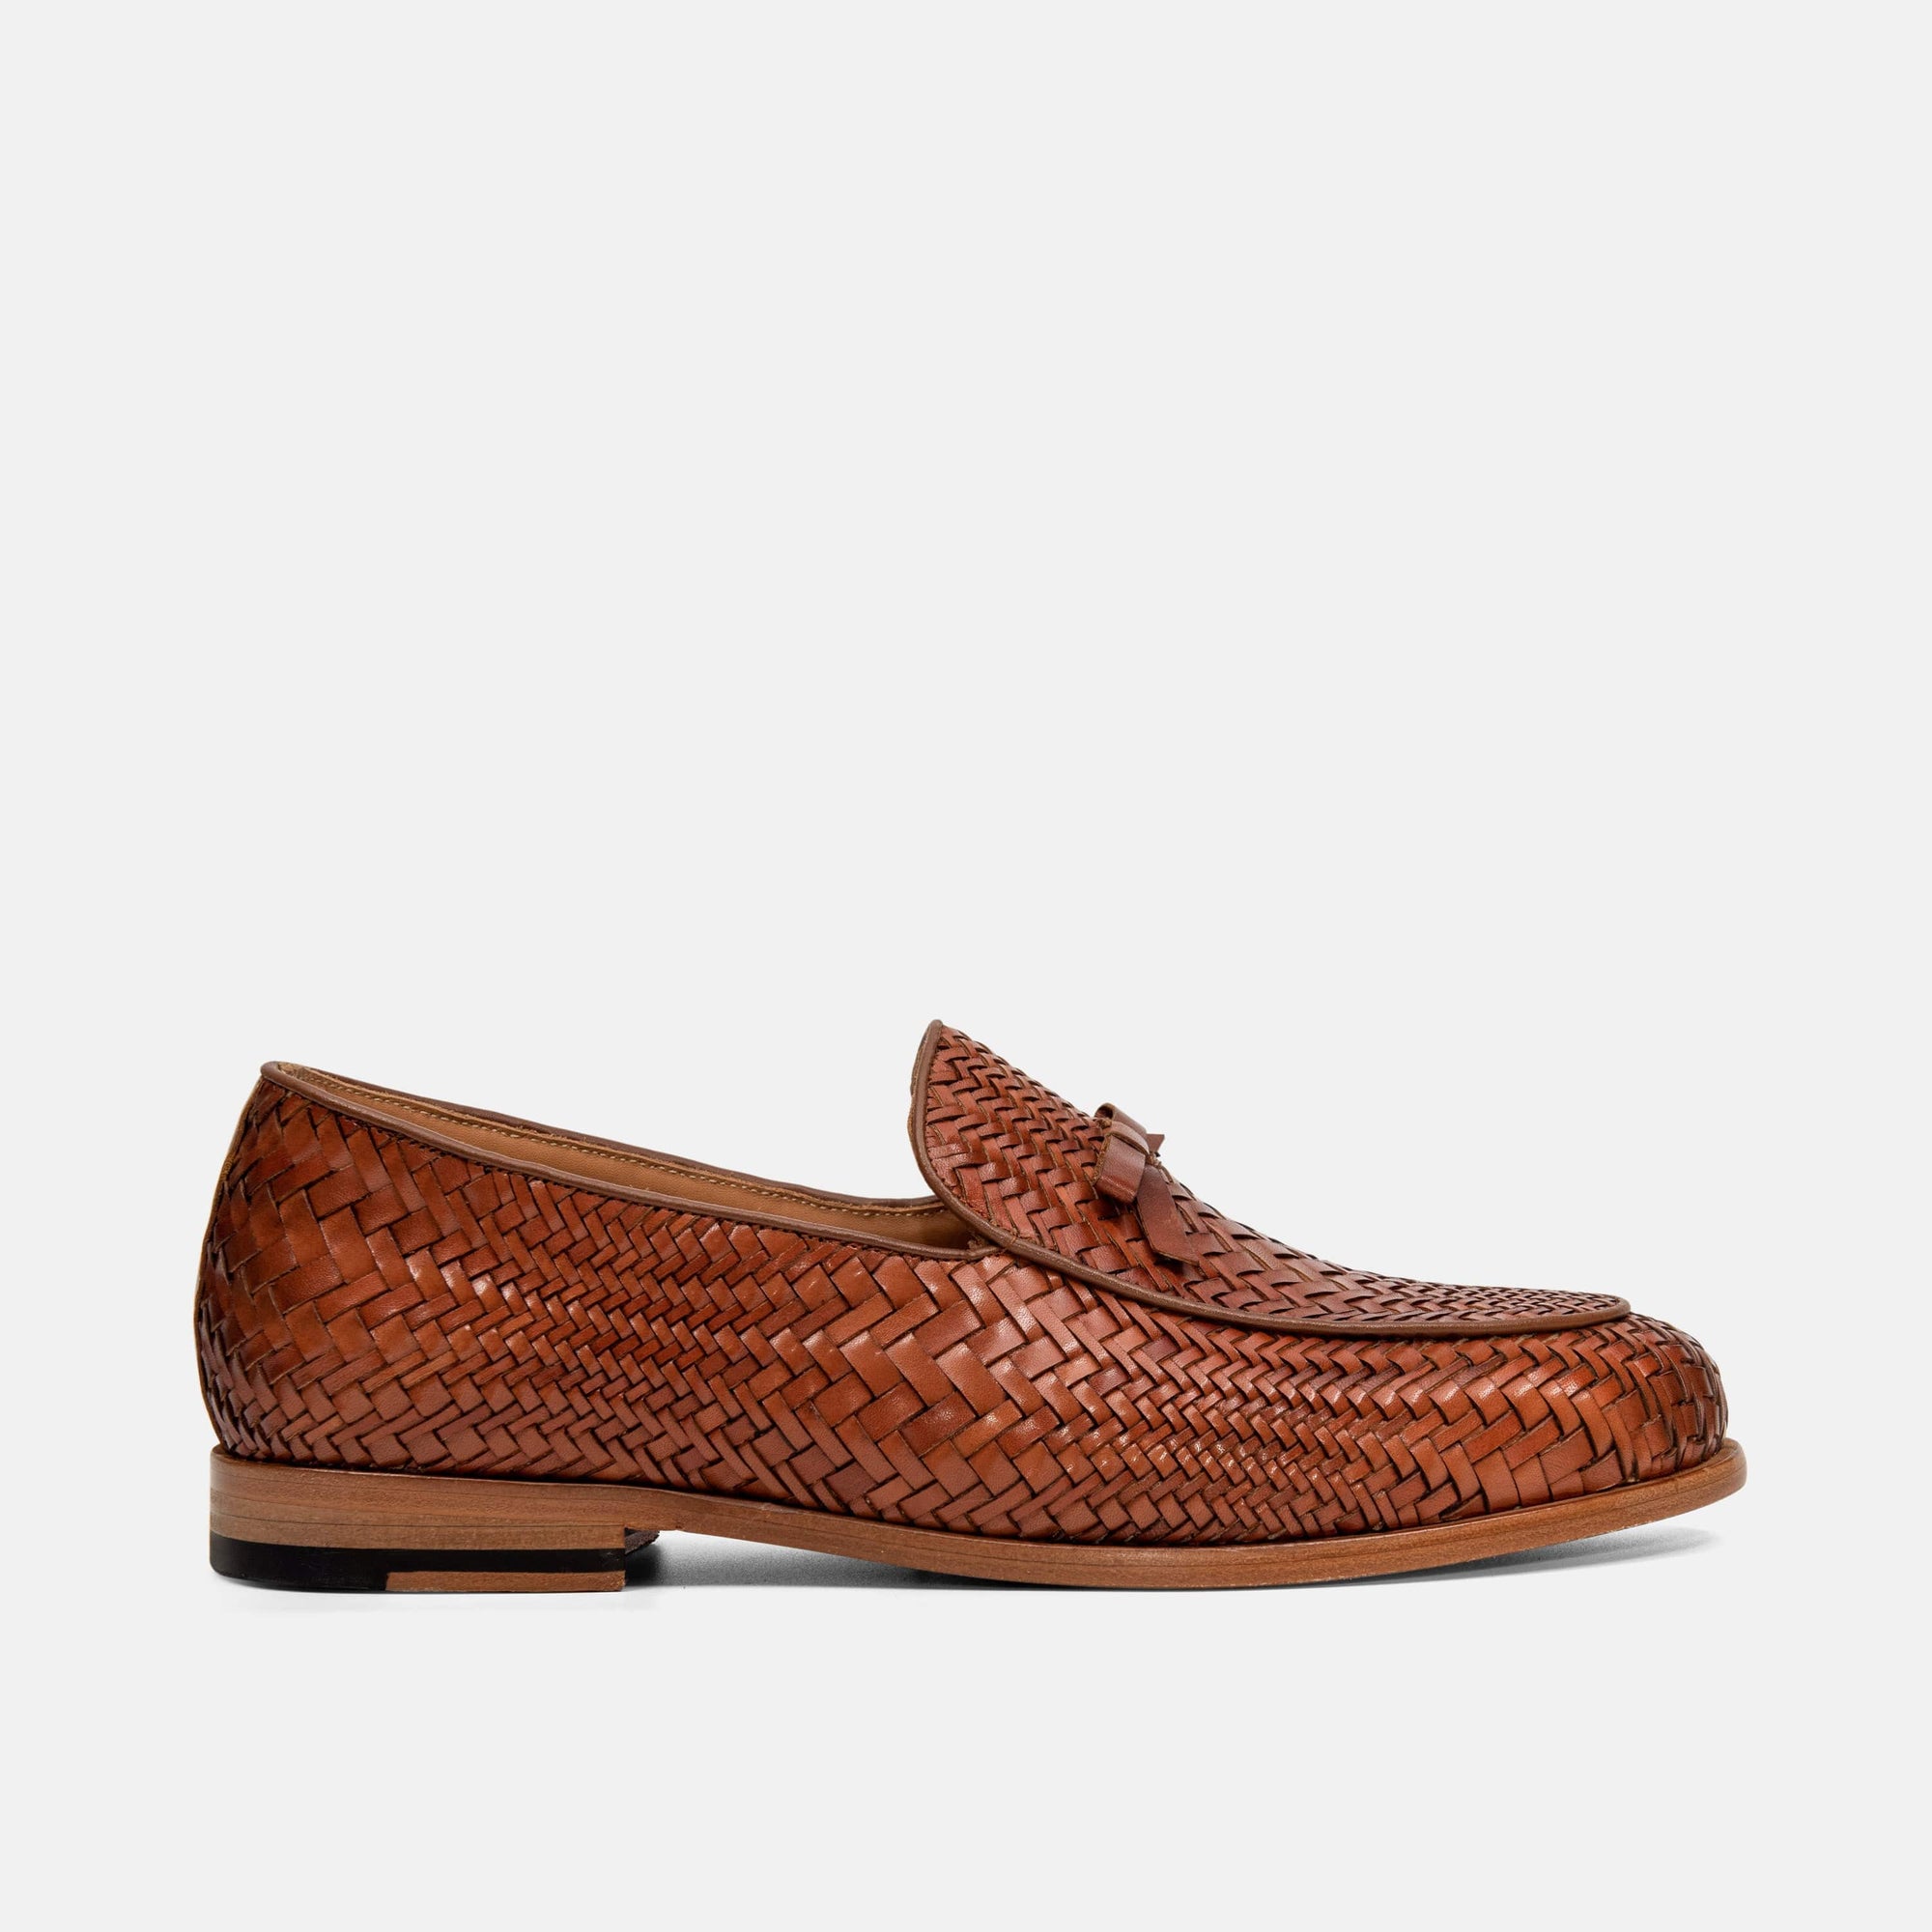 Odell Caramel Woven Leather Belgian Loafers